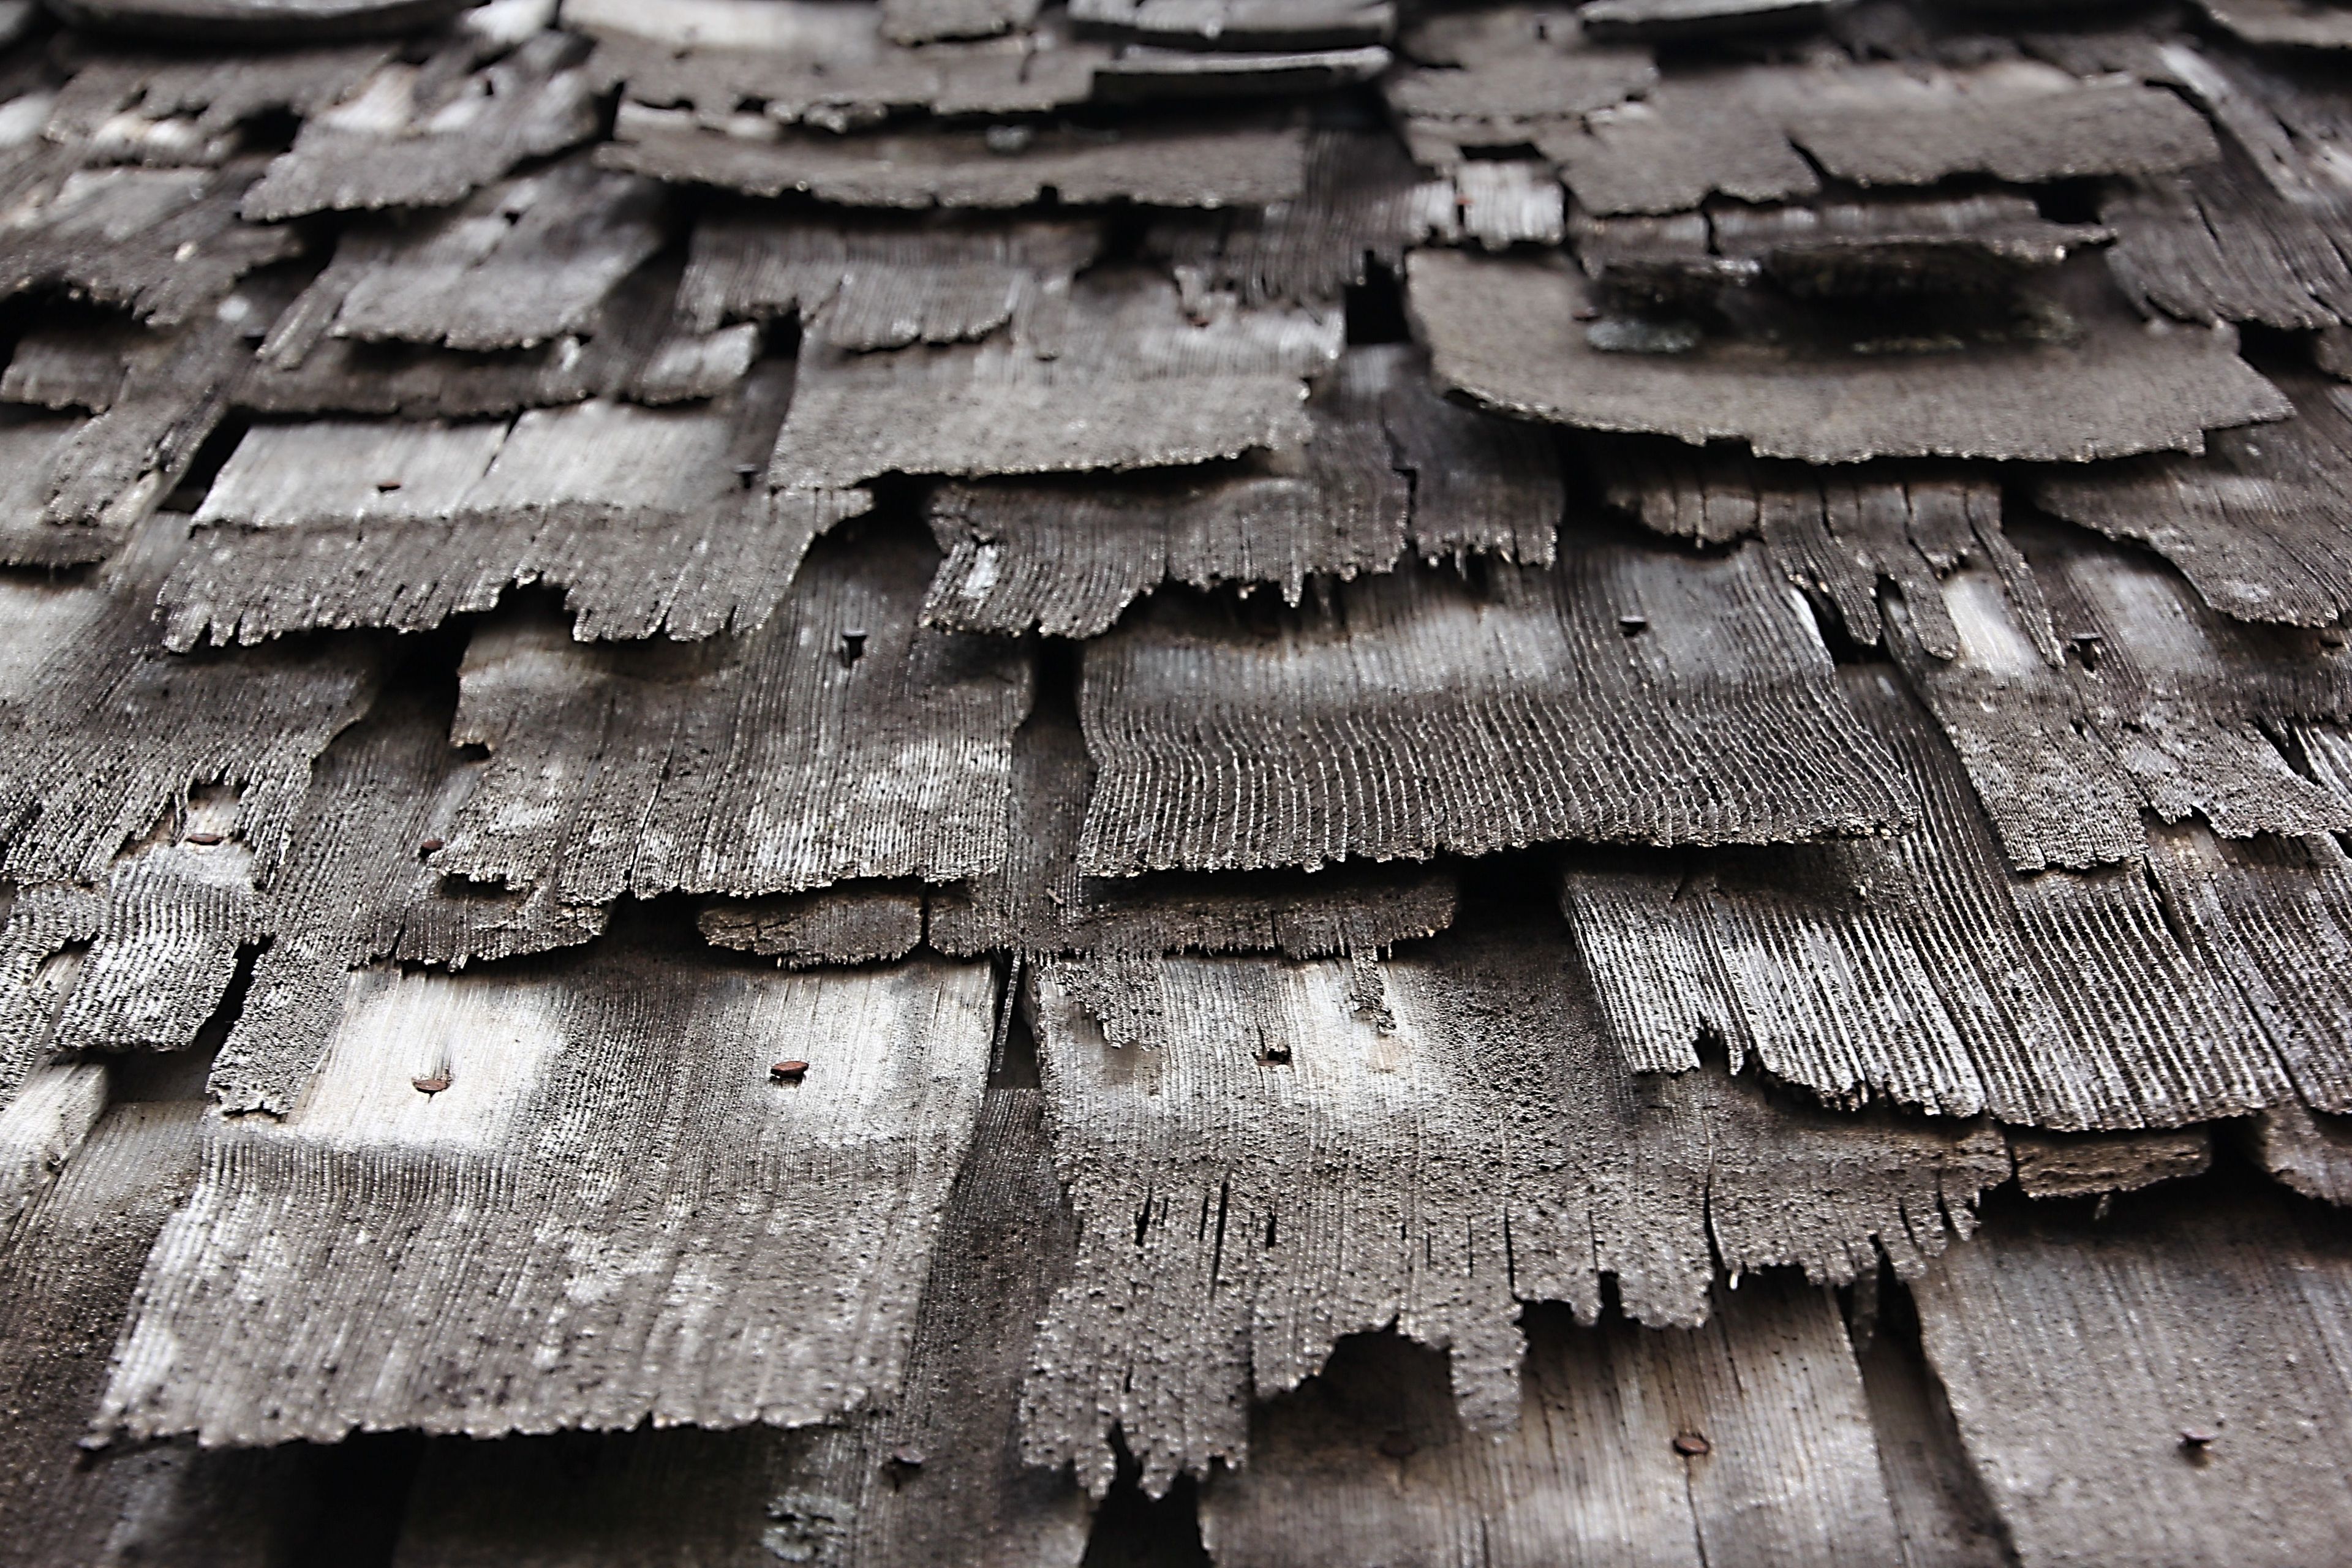 Old wooden shingles stacked in layers on a slanted surface.